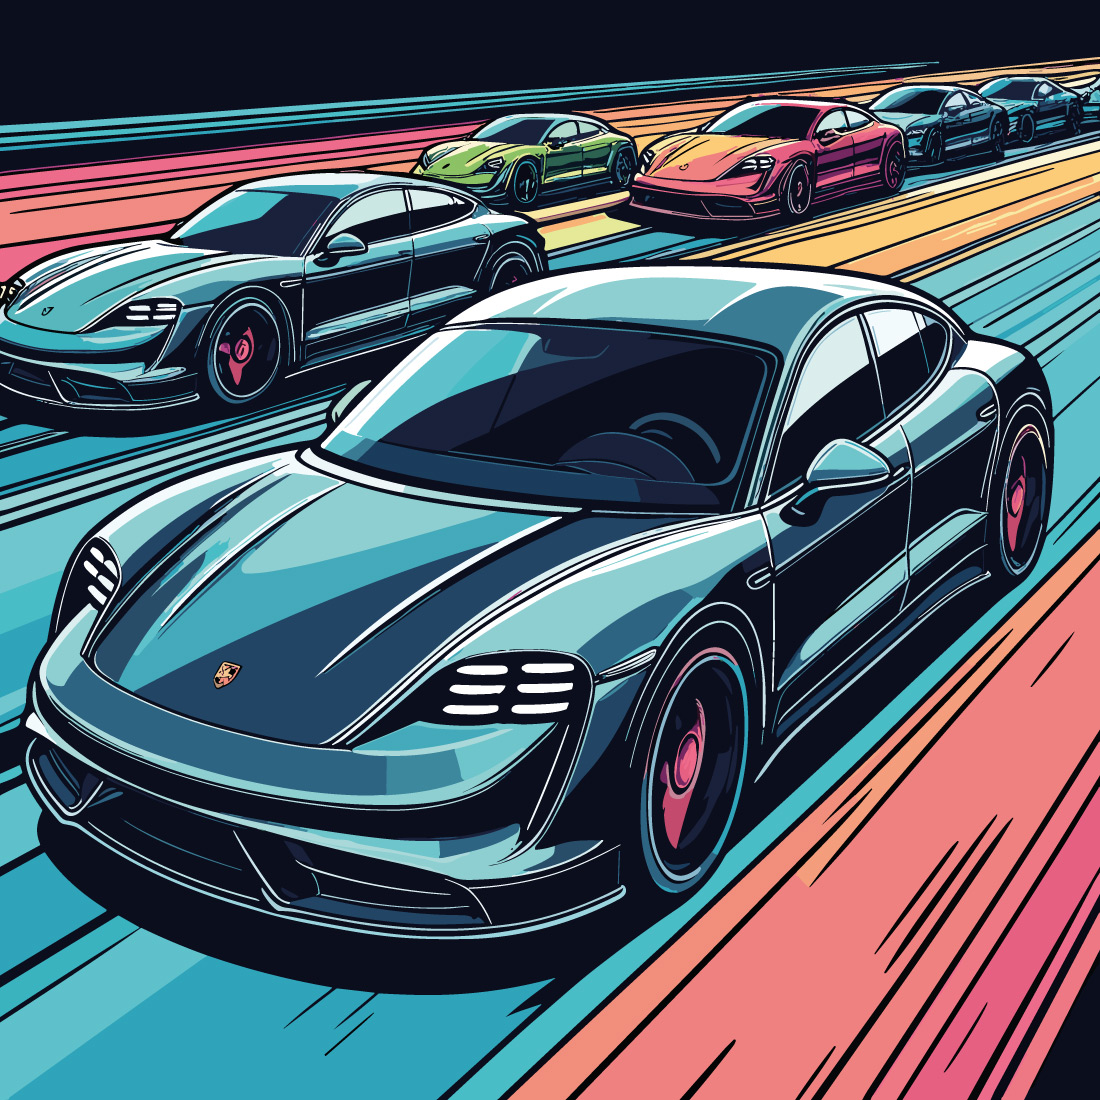 Super Cars cover image.